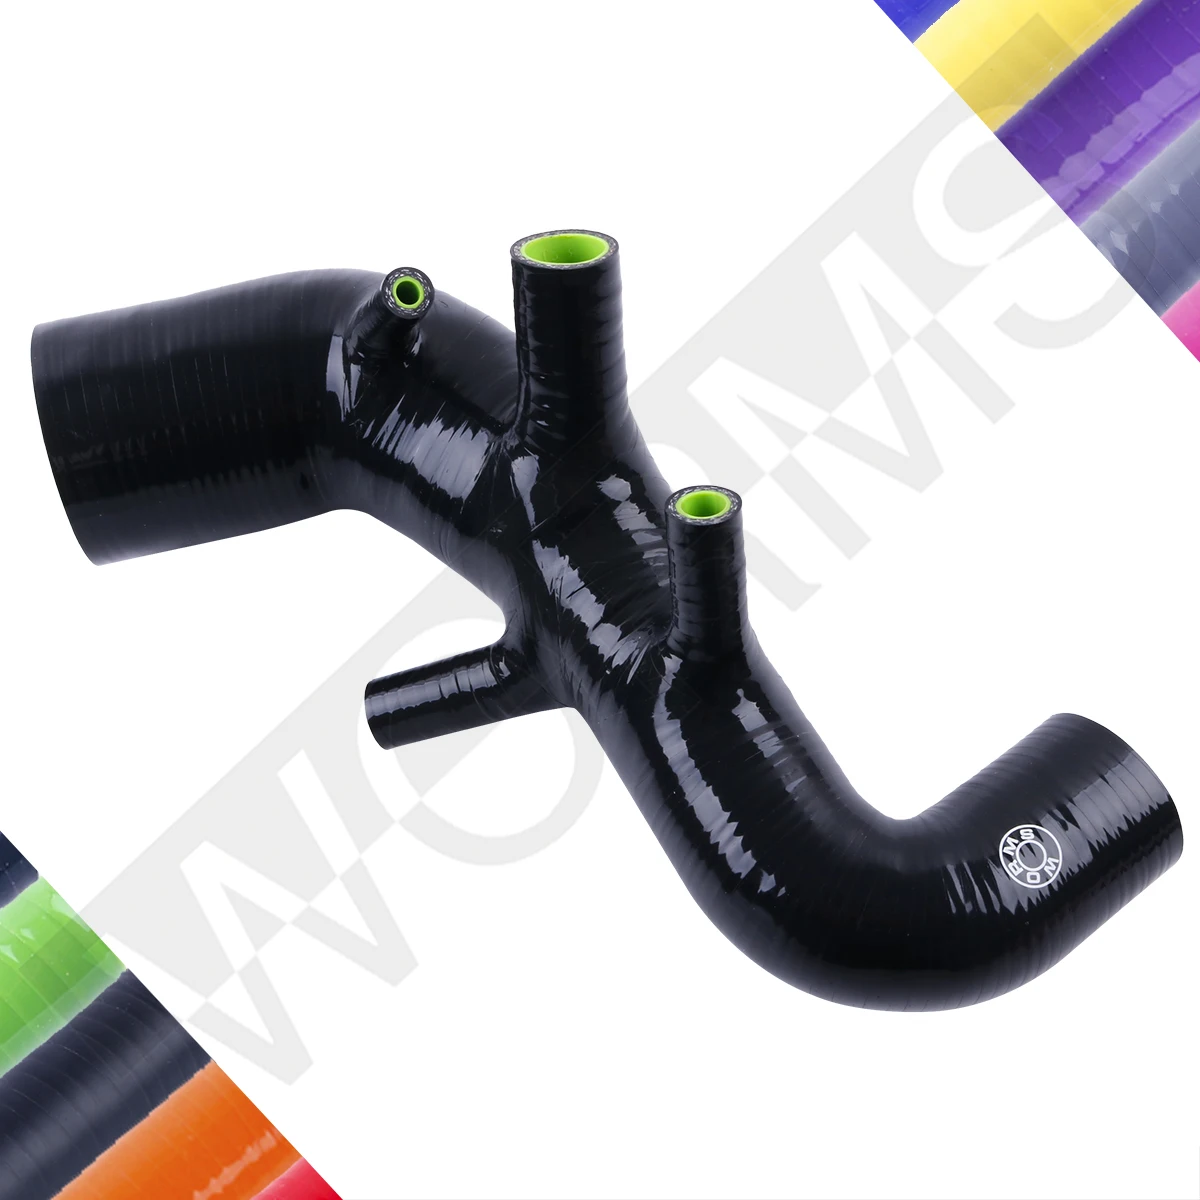 

For 1998-2006 Audi A3 S3 TT Quattro Seat Leon Cupra R BAM 1.8T 225PS Silicone Induction Intake Hose Kit